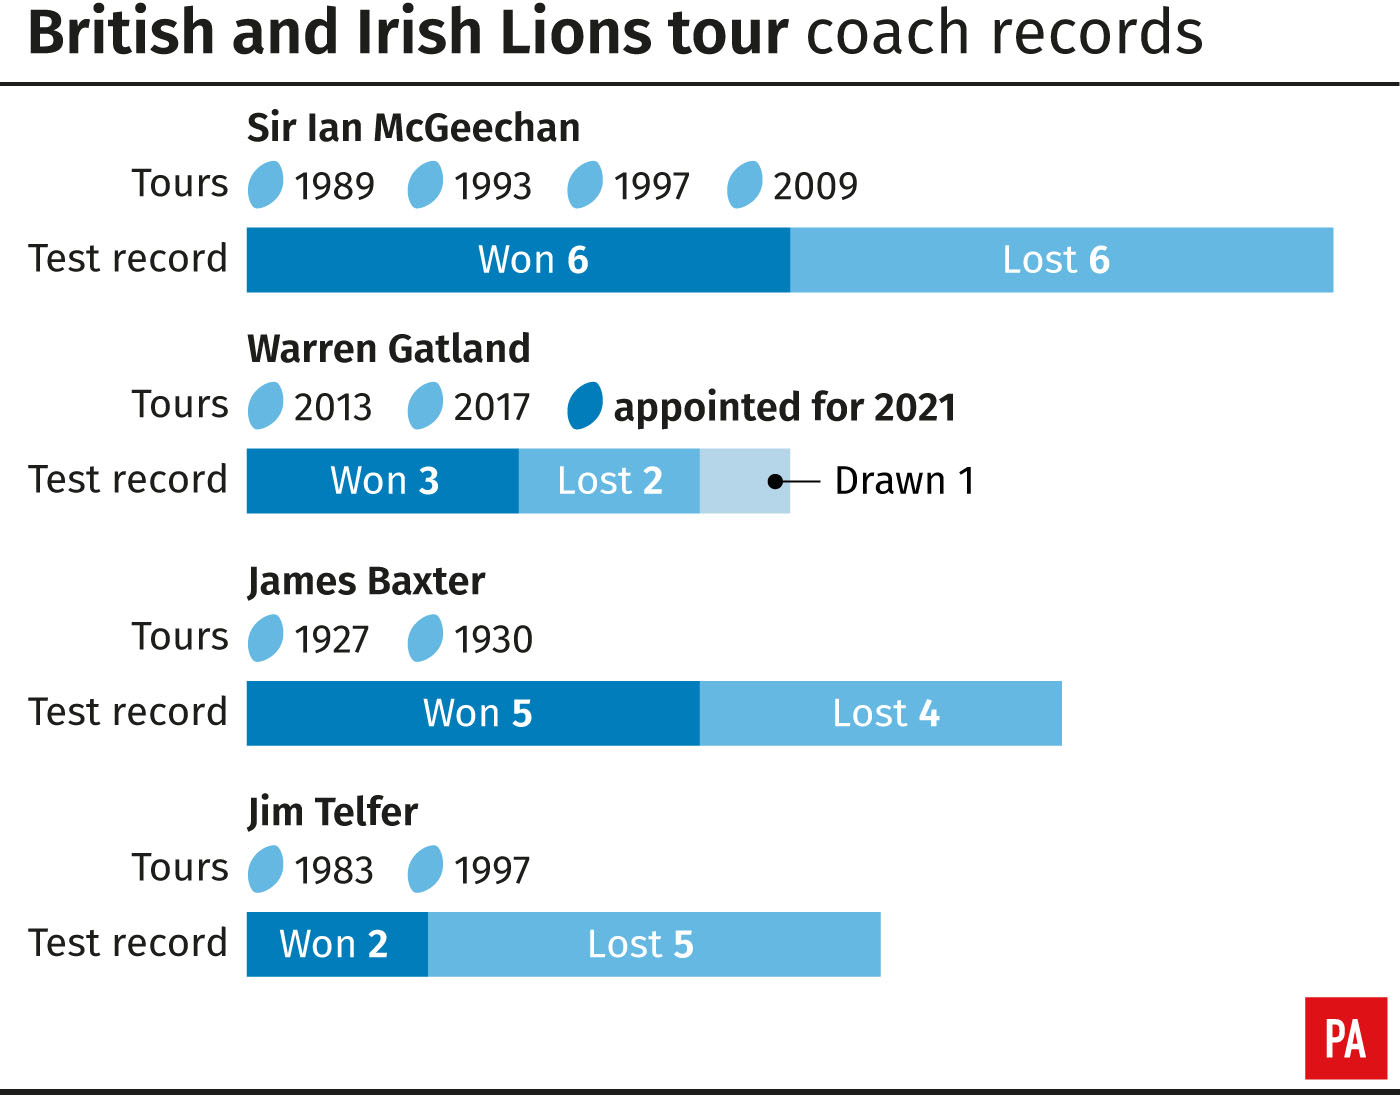 Career records for British and Irish Lions coaches with multiple tours